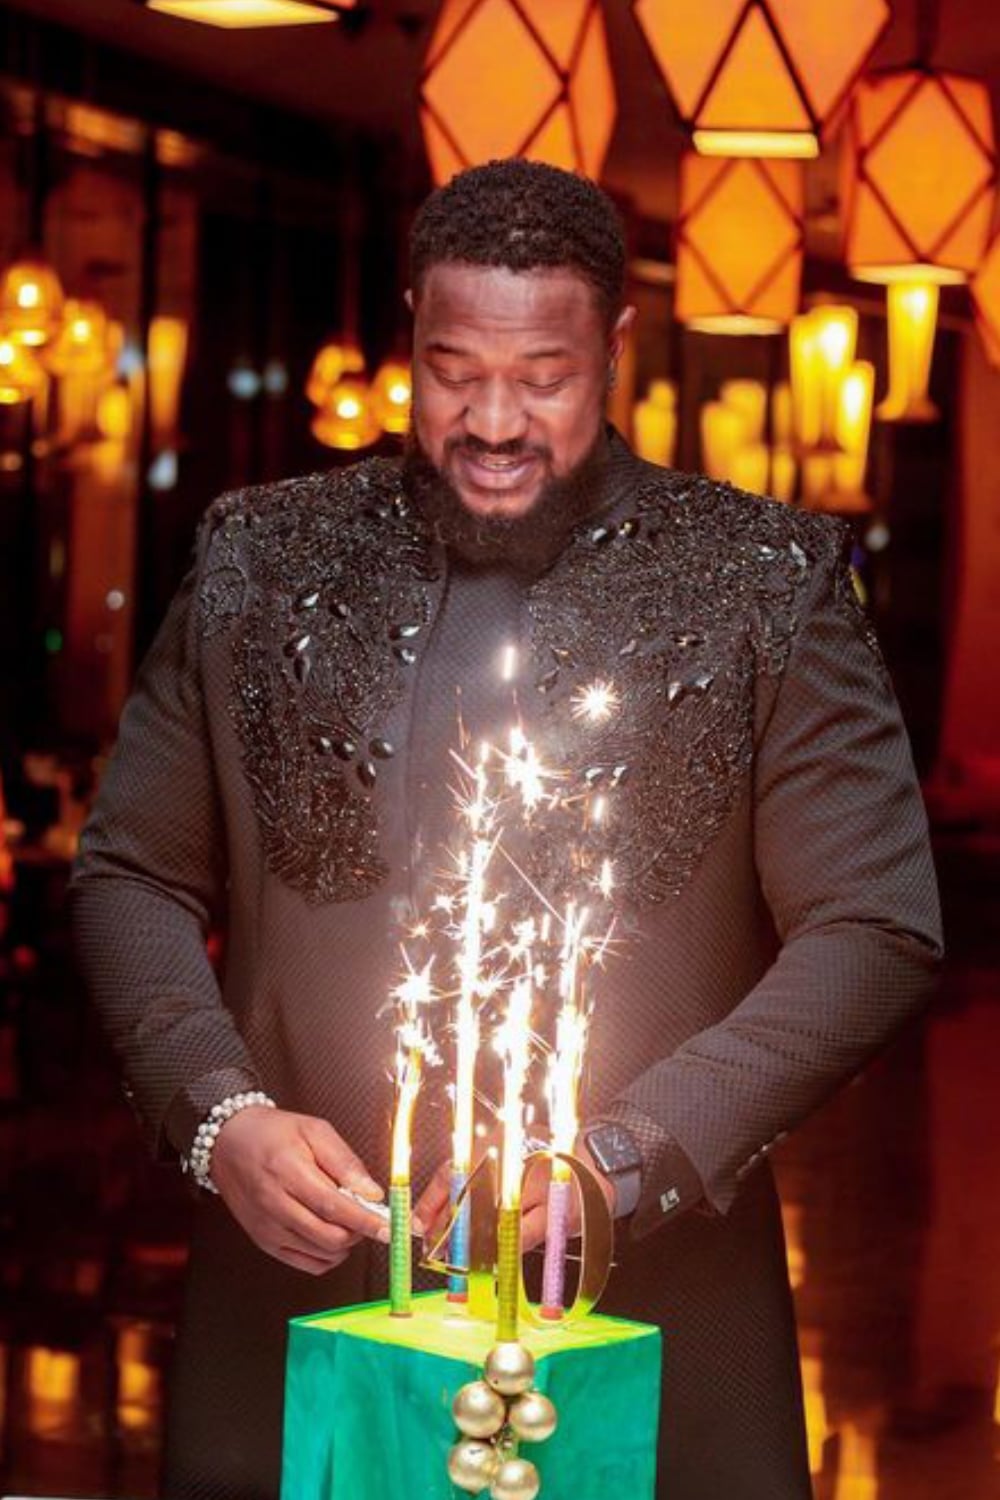 "I was on the verge of tears” - Mofe Duncan overwhelmed with love following 40th birthday celebration